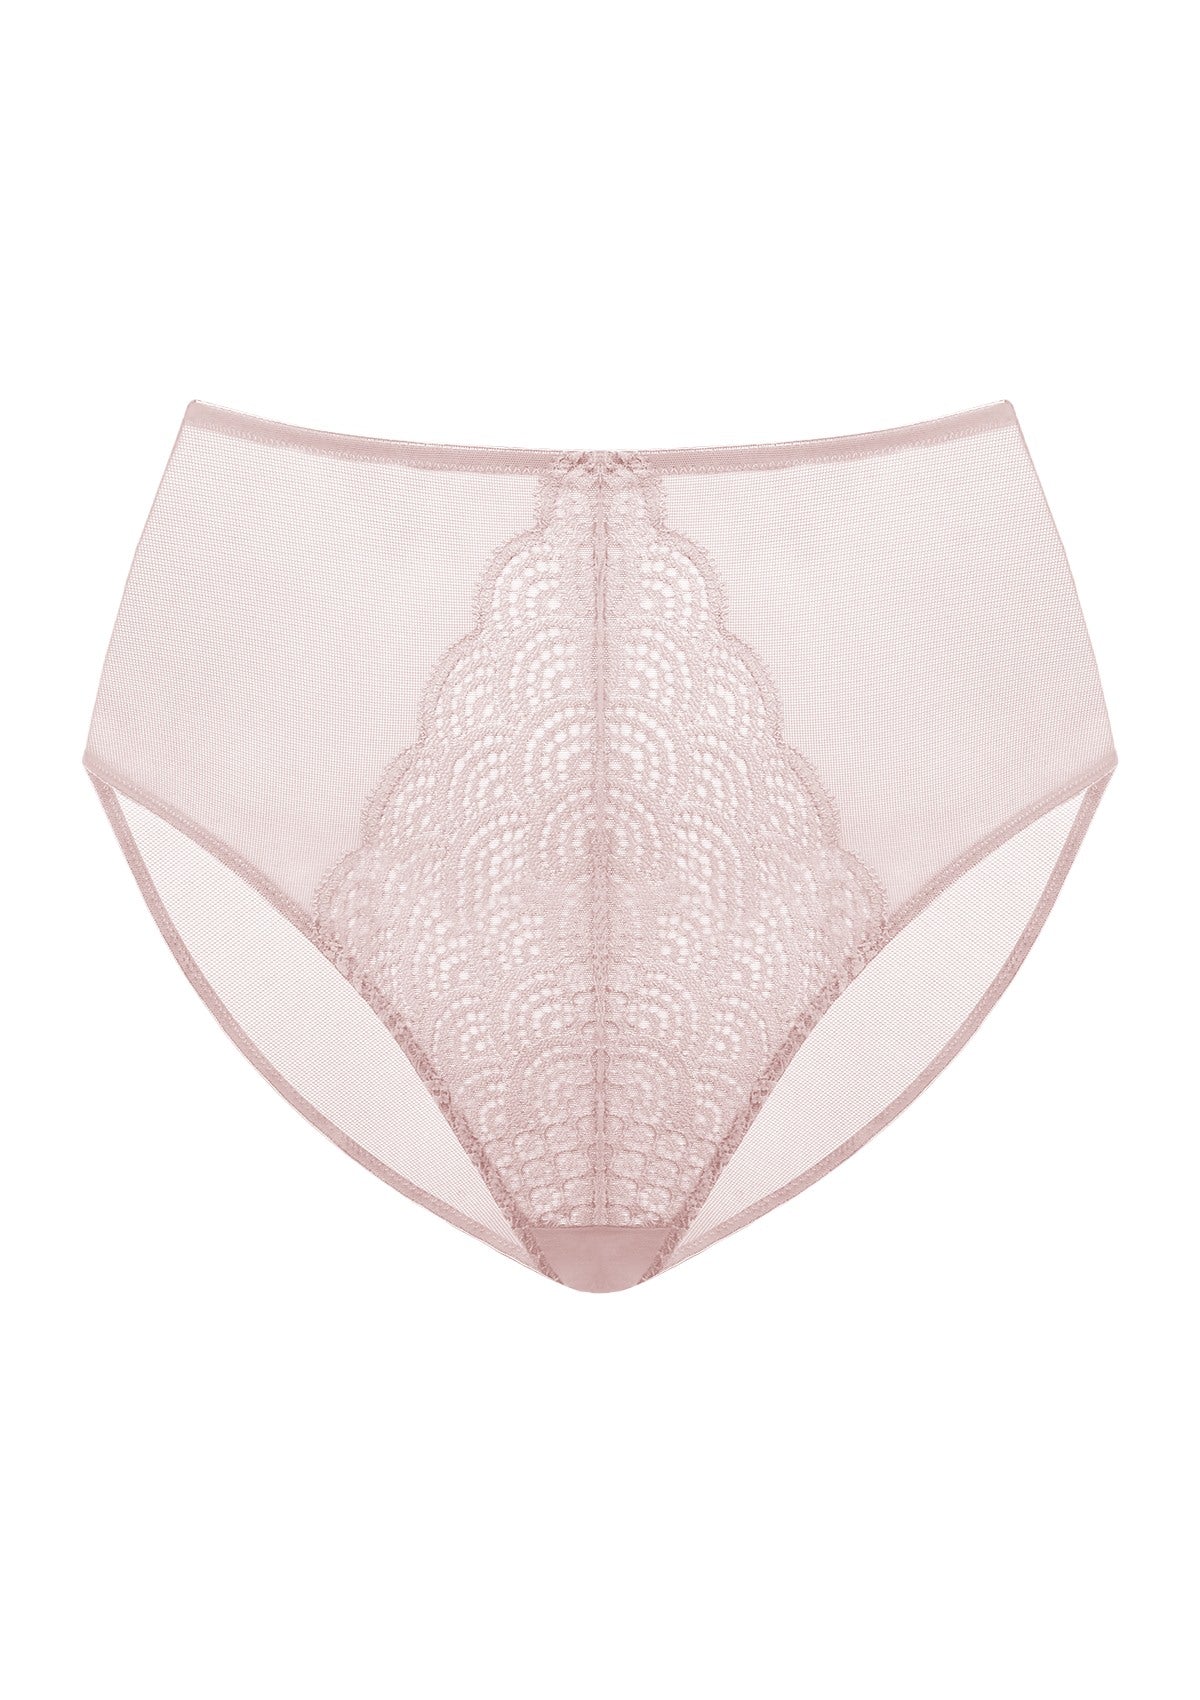 HSIA Spring Romance High-Rise Floral Lacy Panty-Comfort In Style - L / Pink